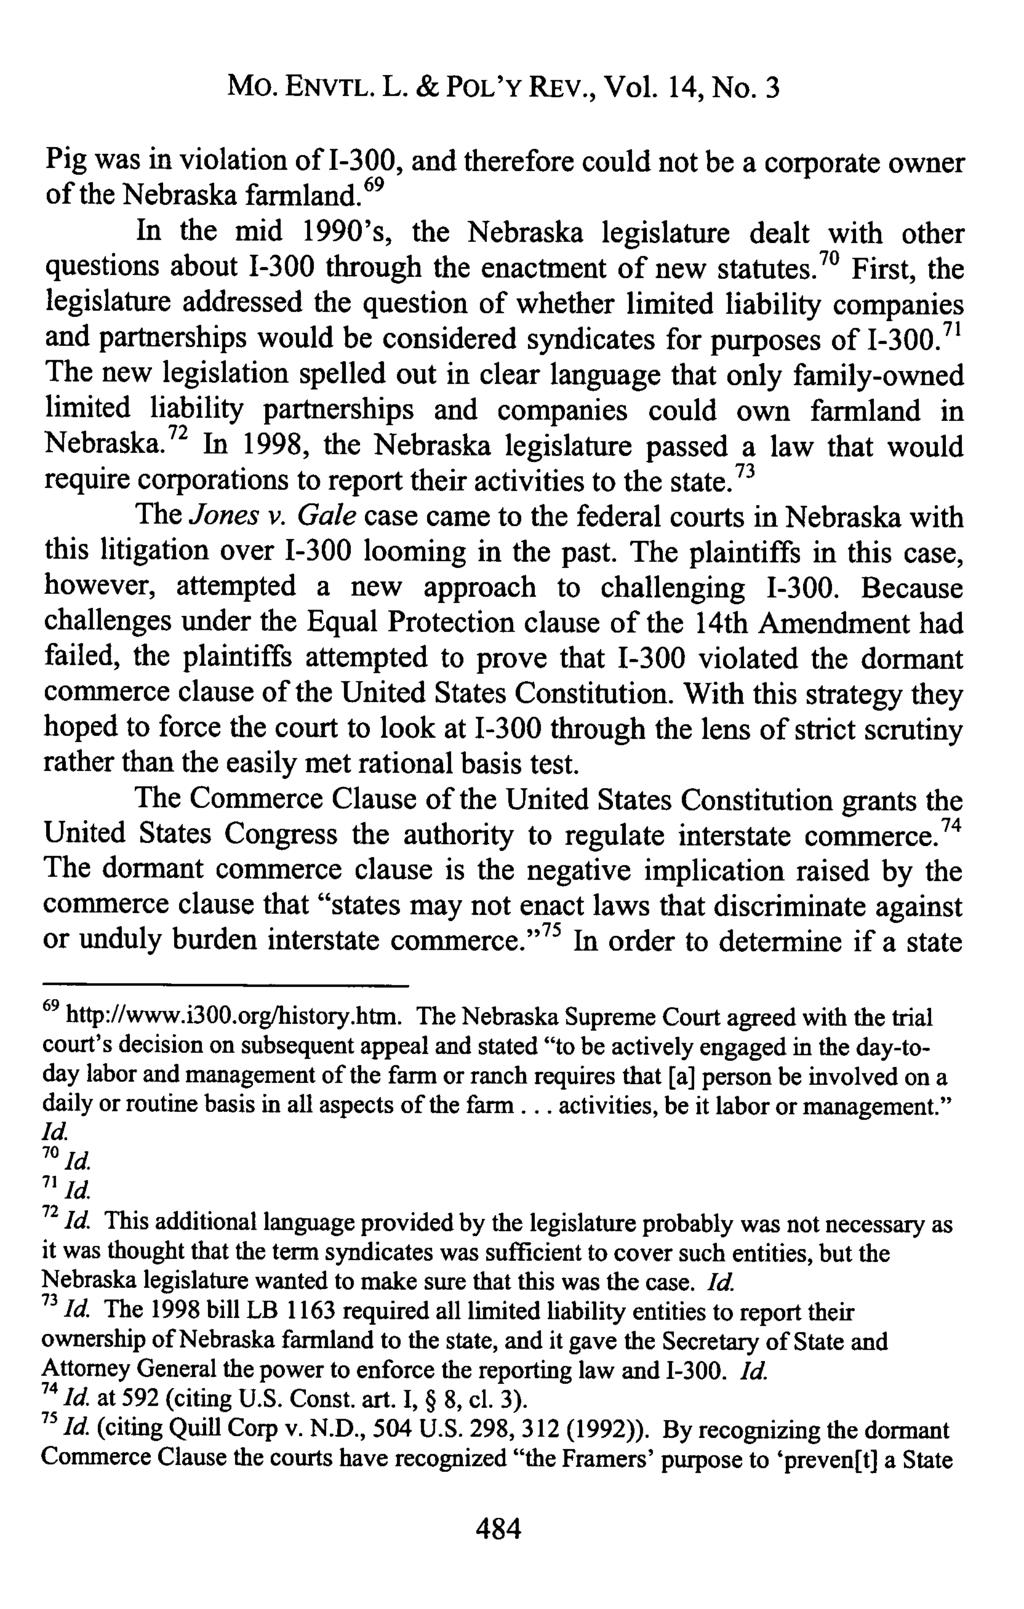 Mo. ENVTL. L. & POL'Y REV., Vol. 14, No. 3 Pig was in violation of 1-300, and therefore could not be a corporate owner of the Nebraska farmland.